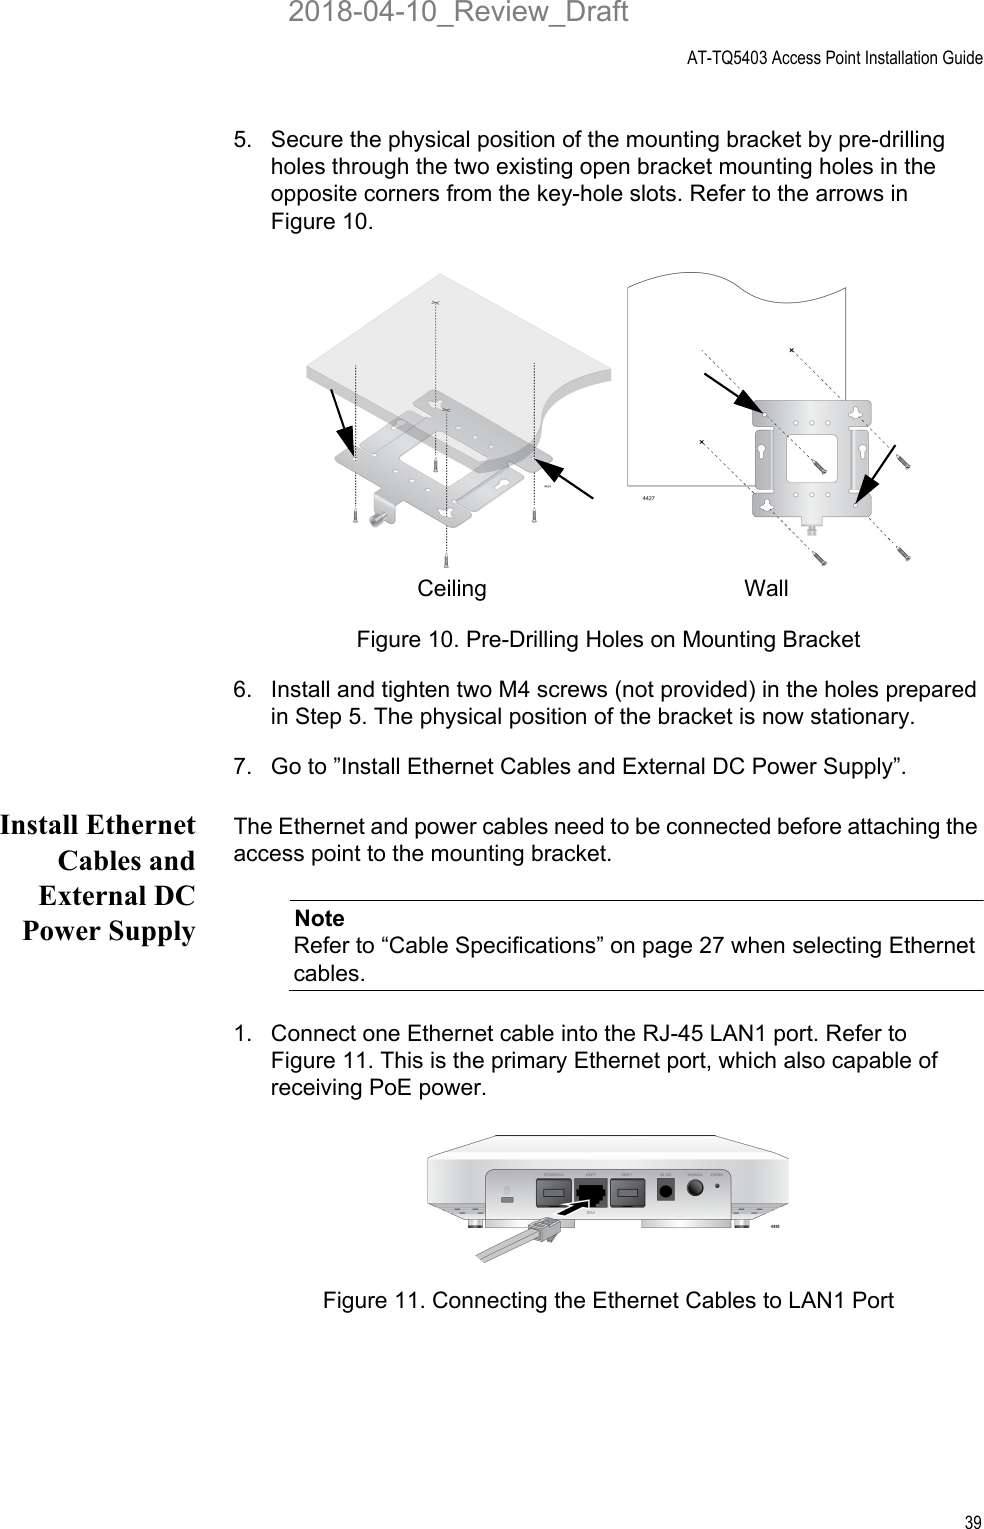 AT-TQ5403 Access Point Installation Guide395. Secure the physical position of the mounting bracket by pre-drilling holes through the two existing open bracket mounting holes in the opposite corners from the key-hole slots. Refer to the arrows in Figure 10.Figure 10. Pre-Drilling Holes on Mounting Bracket6. Install and tighten two M4 screws (not provided) in the holes prepared in Step 5. The physical position of the bracket is now stationary.7. Go to ”Install Ethernet Cables and External DC Power Supply”.Install EthernetCables andExternal DCPower SupplyThe Ethernet and power cables need to be connected before attaching the access point to the mounting bracket. NoteRefer to “Cable Specifications” on page 27 when selecting Ethernet cables.1. Connect one Ethernet cable into the RJ-45 LAN1 port. Refer to Figure 11. This is the primary Ethernet port, which also capable of receiving PoE power.Figure 11. Connecting the Ethernet Cables to LAN1 PortCeiling  Wall 2018-04-10_Review_Draft